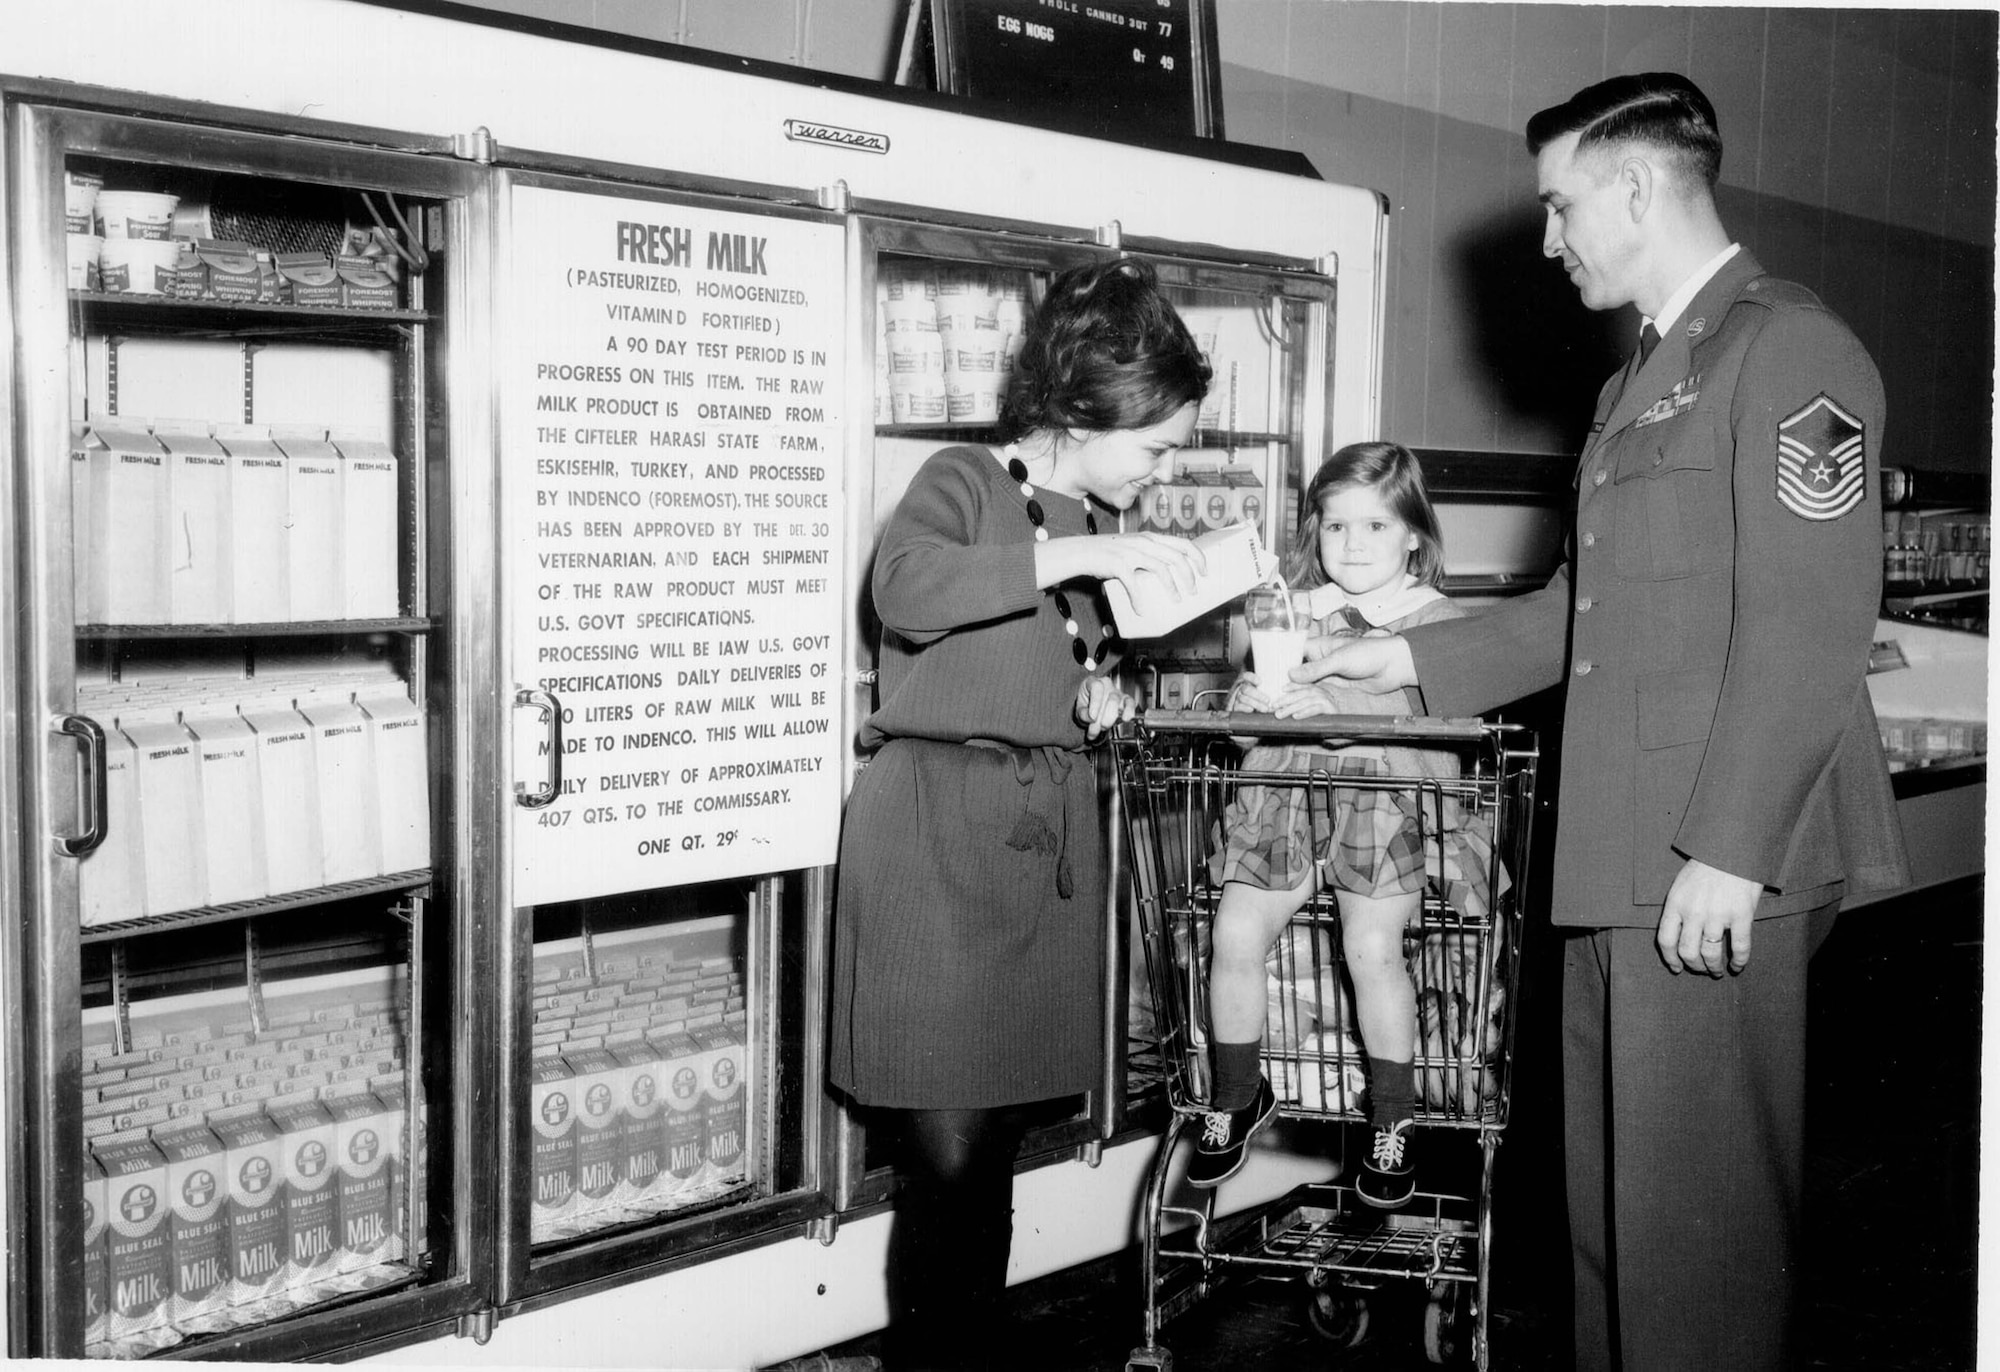 In this 1967 photo, parents pour a glass of fresh milk for their daughter inside the Ankara Air Base, Turkey, commissary. This was a publicity photo for a 90-day test program for daily deliveries of 407 quarts of fresh milk. The milk was obtained from a Turkish state farm meeting U.S. standards, and was processed by a contractor following American specifications. The poster on the cooler says the finished product was “Pasteurized, Homogenized [and] Vitamin D fortified.” The program exemplifies the special concerns and needs of families living overseas at the far end of a long supply pipeline. (DeCA historical file) 
